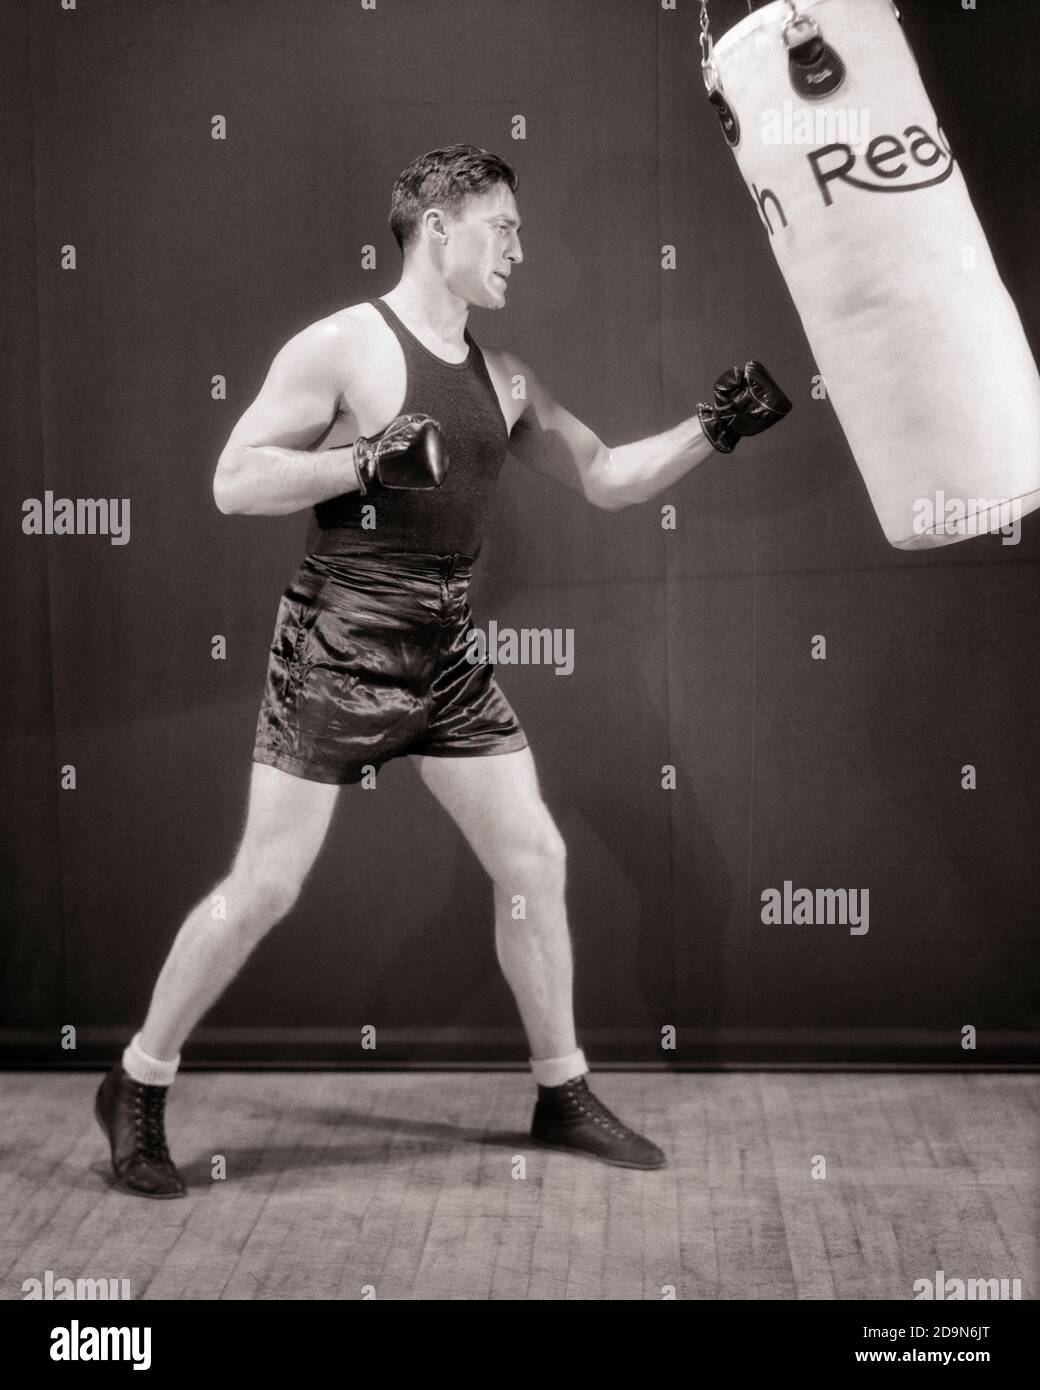 1930s MAN BOXER WEARING BLACK TRUNKS AND TANK SPARRING PRACTICING EXERCISING WITH A REACH HEAVY BAG PUNCHING BAG - g4369 HAR001 HARS COPY SPACE FULL-LENGTH PHYSICAL FITNESS PERSONS INSPIRATION MALES ATHLETIC B&W HITTING GOALS ACTIVITY PHYSICAL STRENGTH AND RECREATION OCCUPATIONS PUNCHING CONNECTION ATHLETES FLEXIBILITY MUSCLES PUGILIST PRIZEFIGHTING FISTICUFFS MID-ADULT MID-ADULT MAN PRECISION SPARRING STRIKING TRUNKS WORKOUT BLACK AND WHITE CAUCASIAN ETHNICITY HAR001 OLD FASHIONED PRACTICING Stock Photo